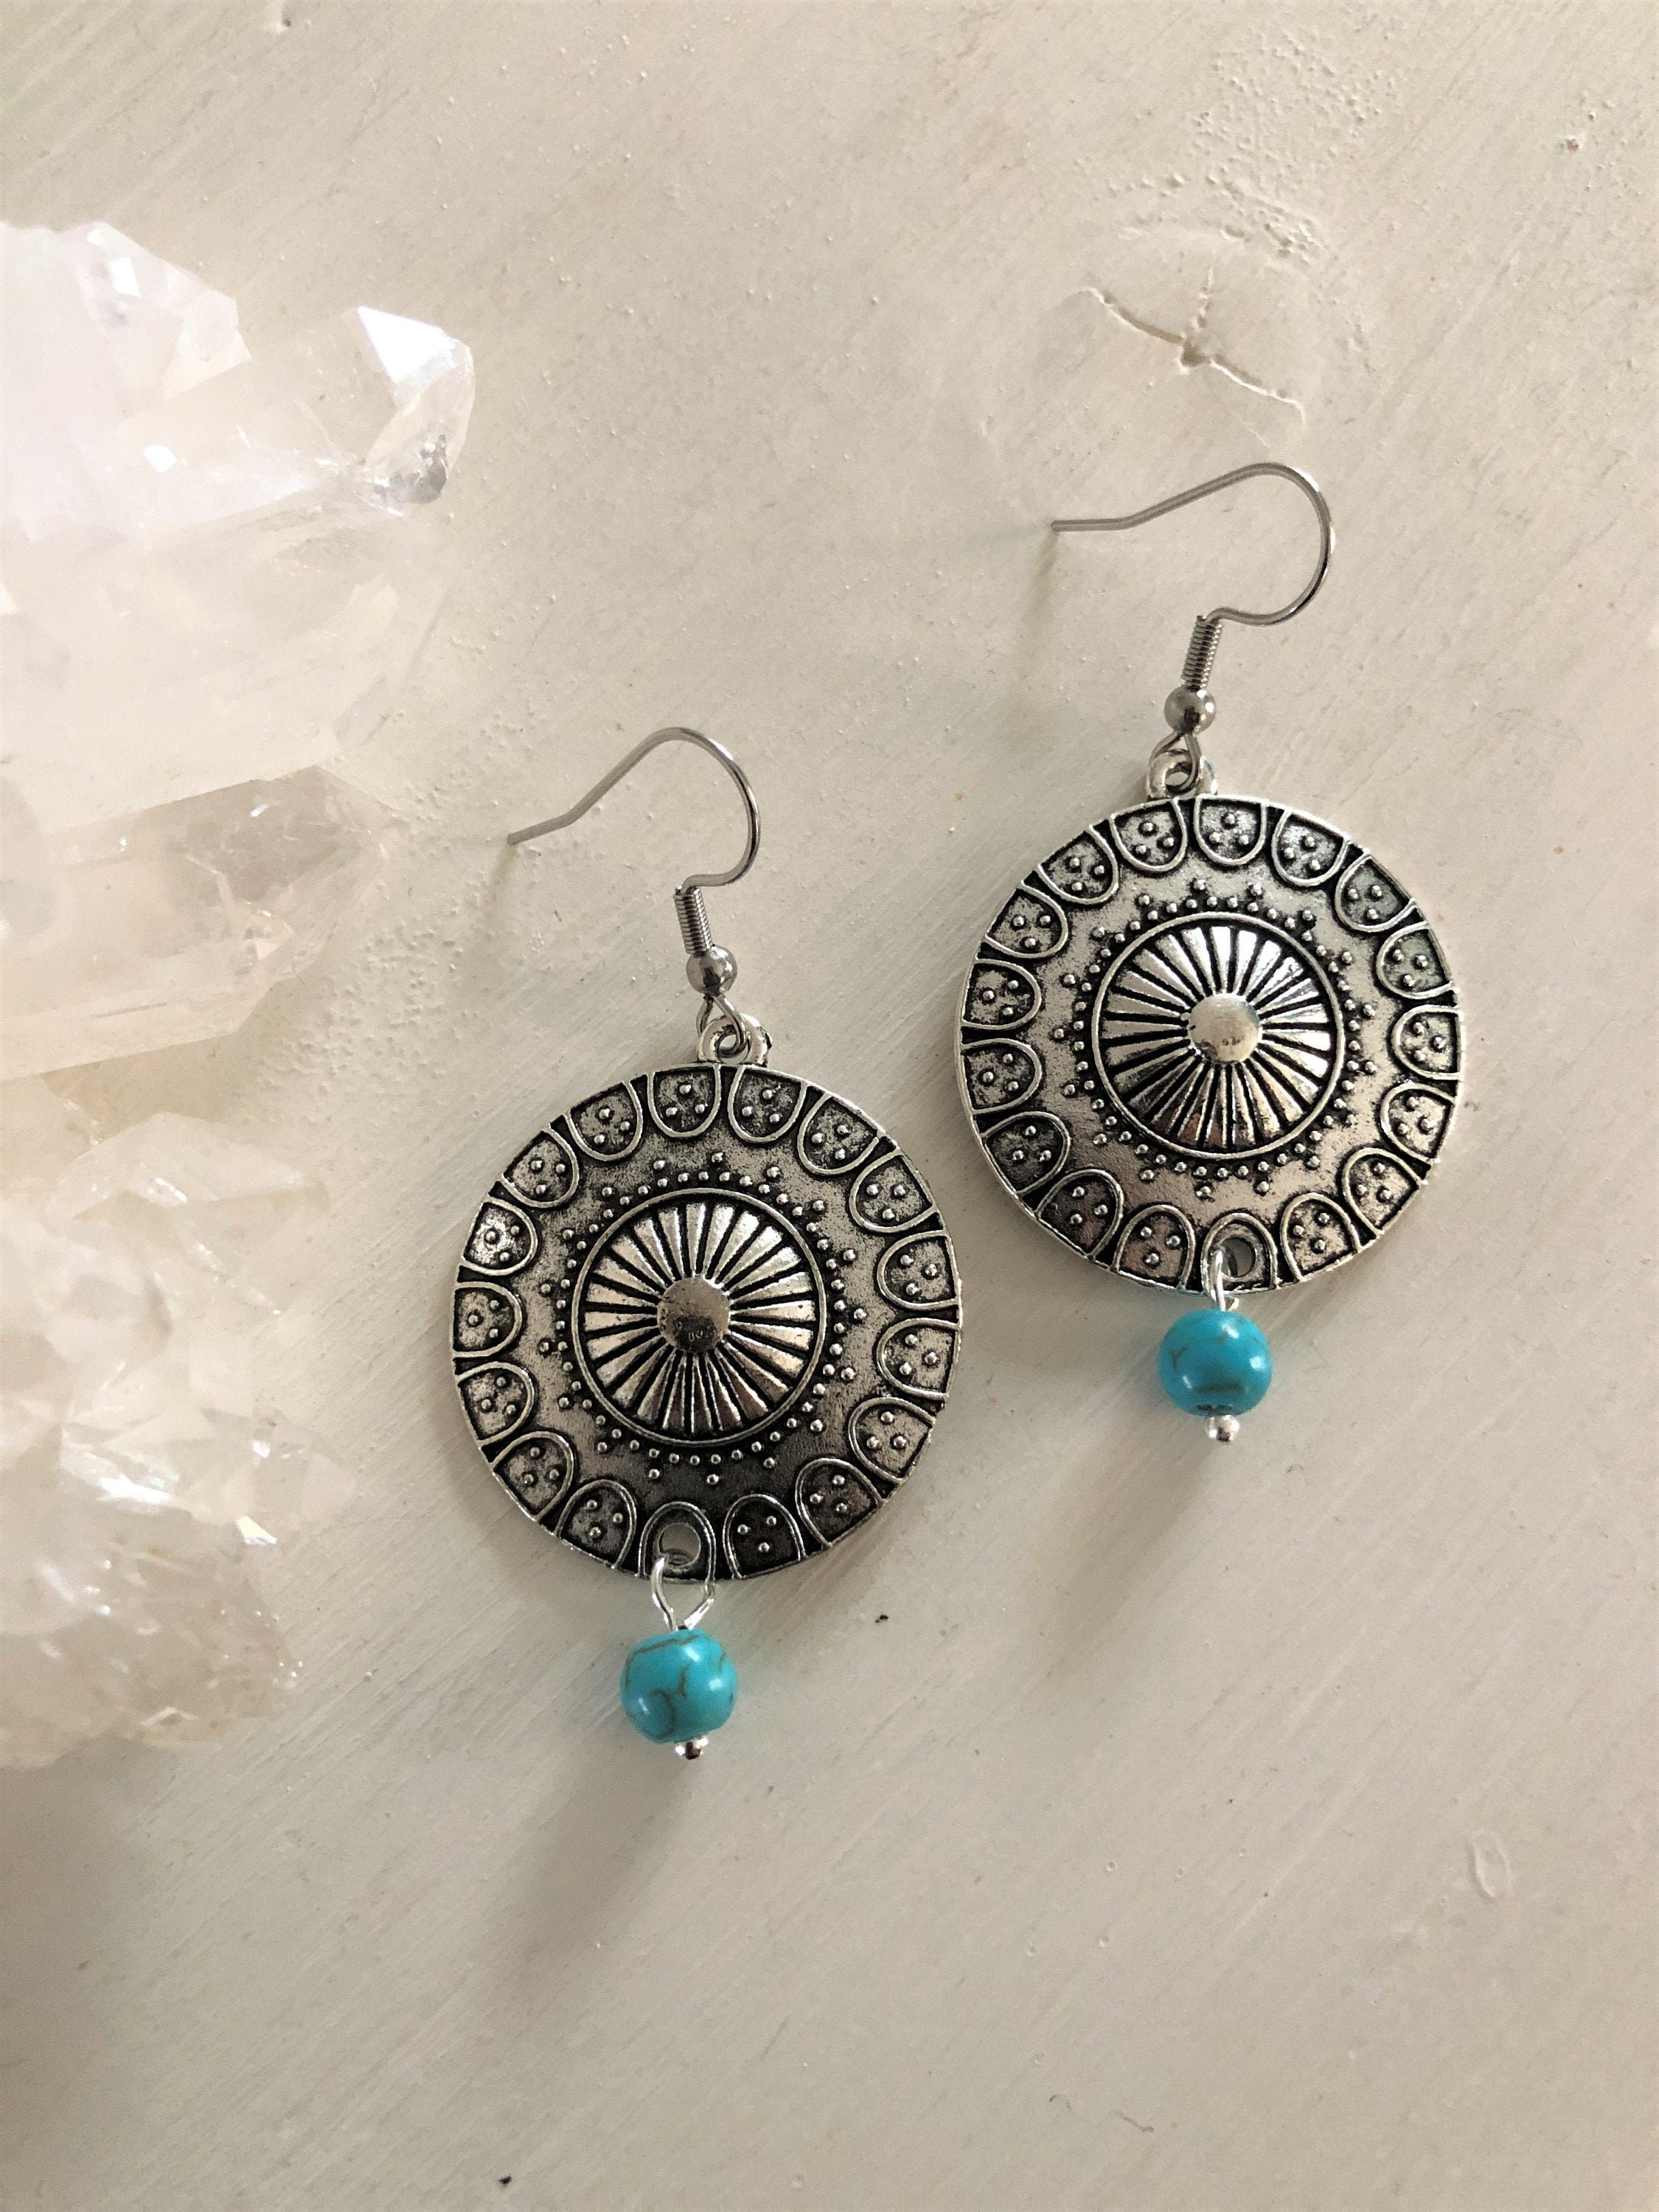 Silver Earrings Hill Tribe Handcraft Ethnic Bohemian Styles Round er044 